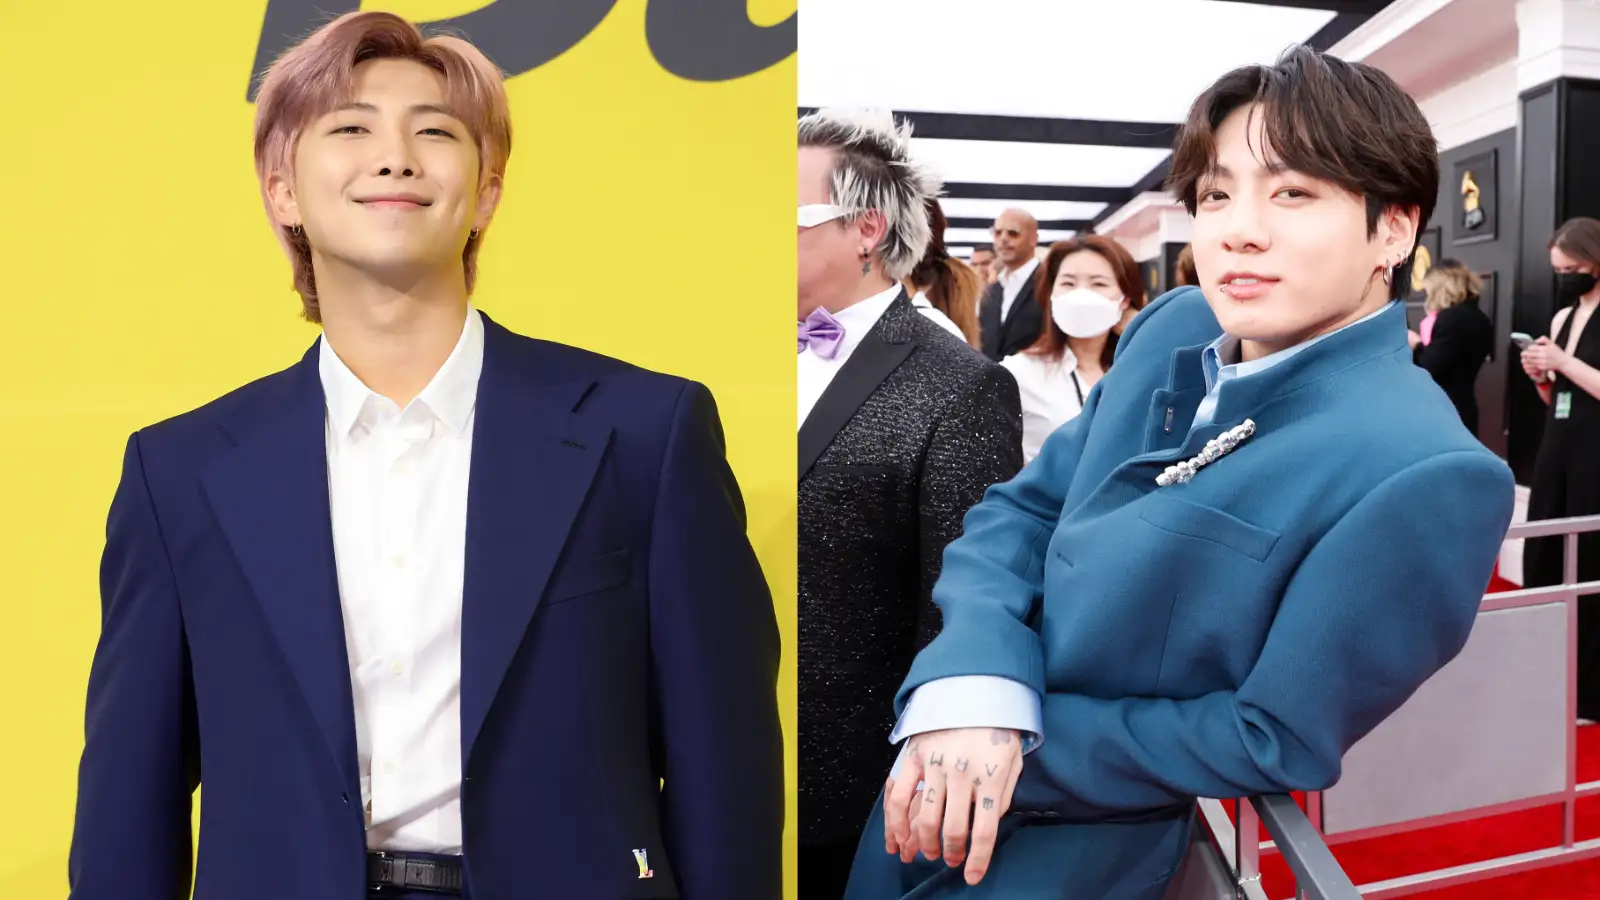 BTS' RM and Jungkook will attend the 2023 Grammys? Here's why it's payback  time for the K-pop group